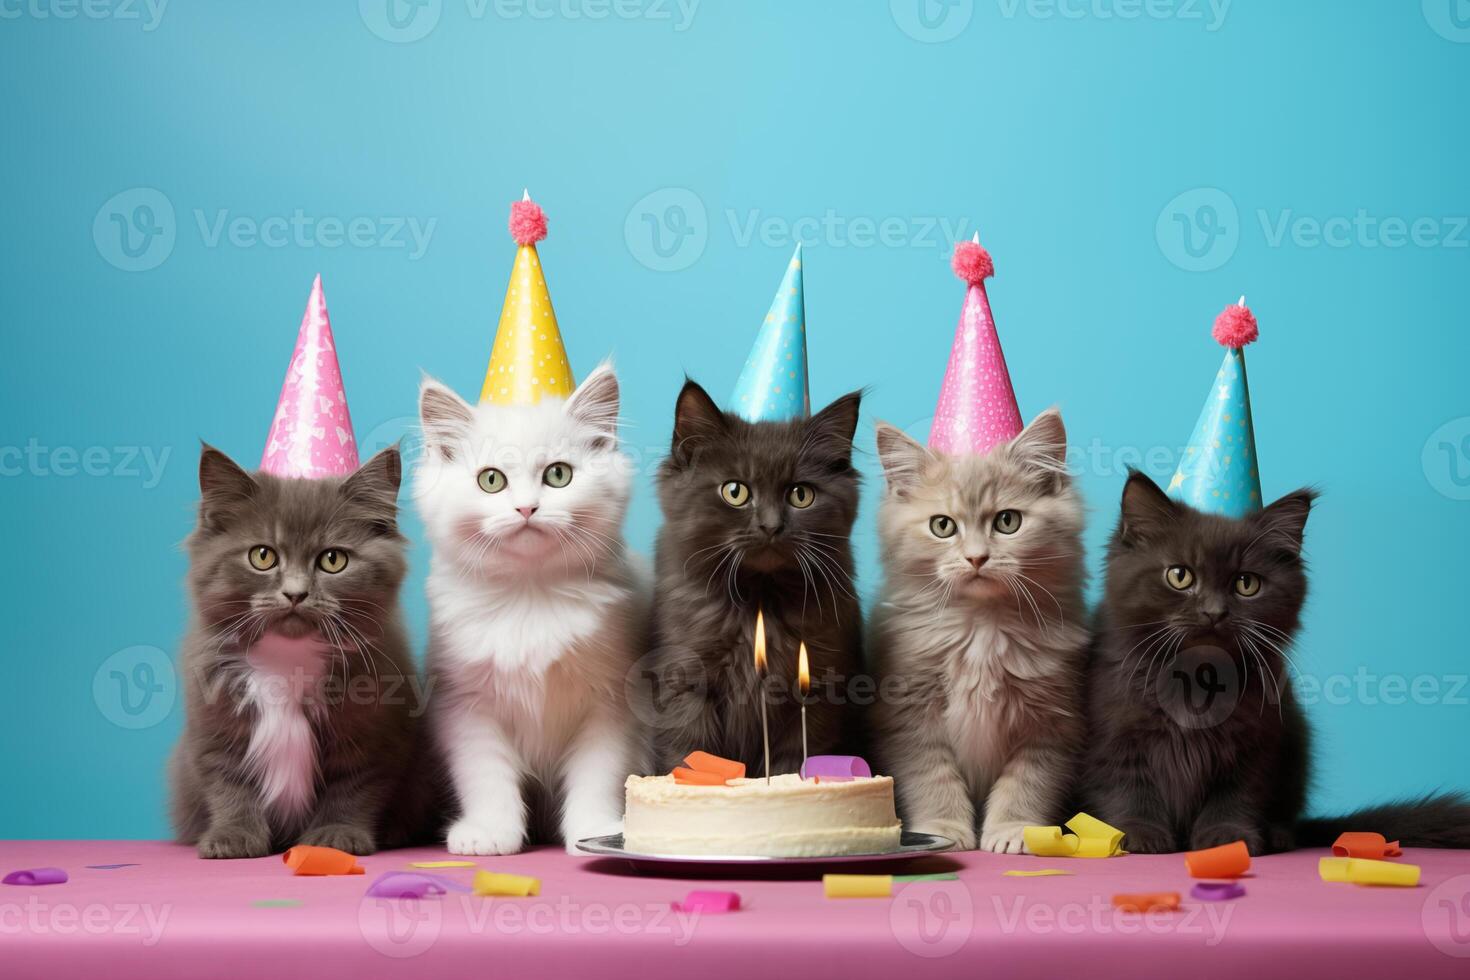 Celebration, happy birthday, Sylvester New Year's eve party, funny animal greeting card - Group of cute little cats pets with party hat on blue pink table wall background texture photo